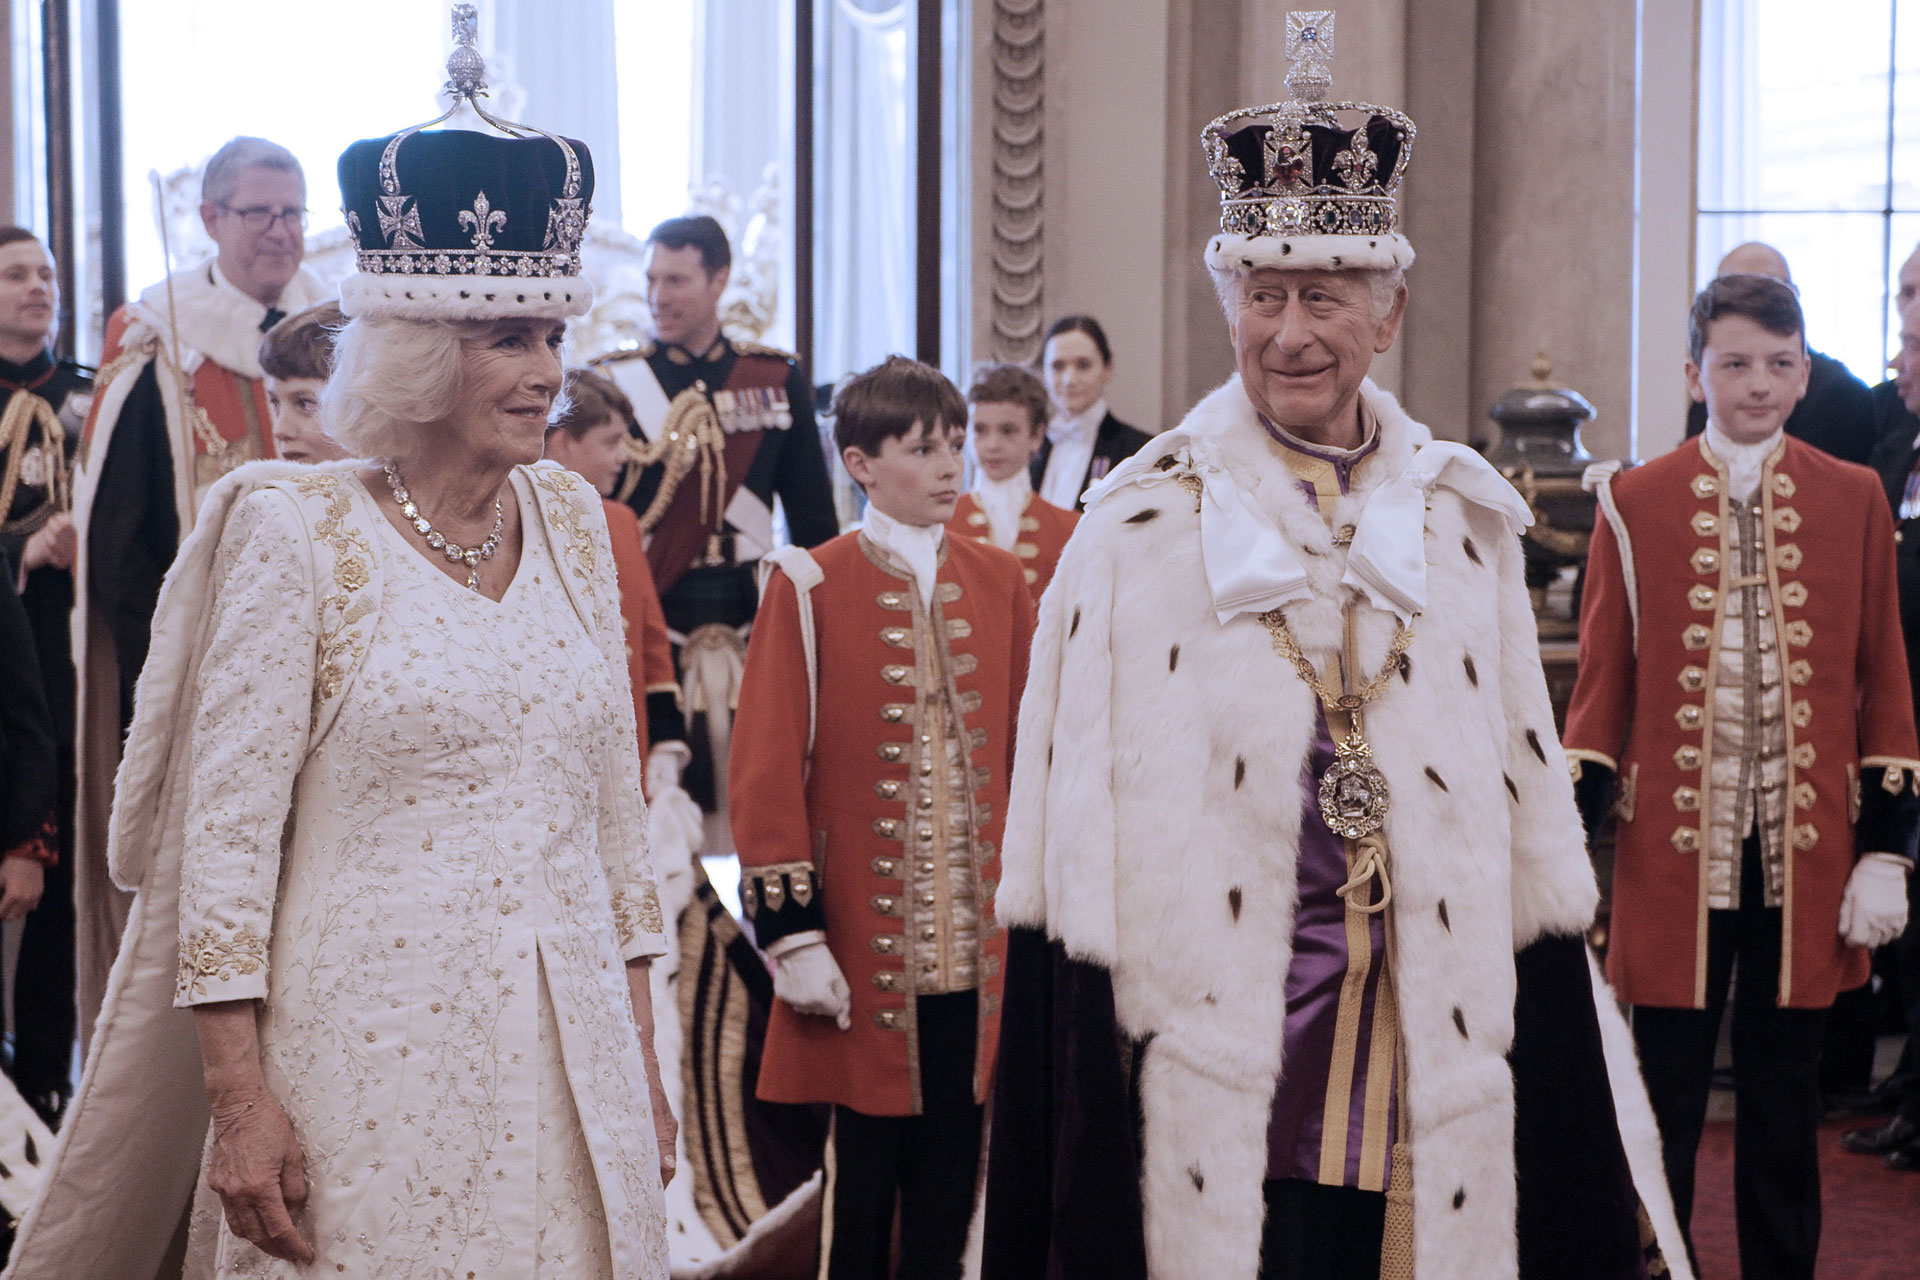 King Charles III and Queen Camilla in Coronation gowns and crowns at Buckingham Palace on Coronation day